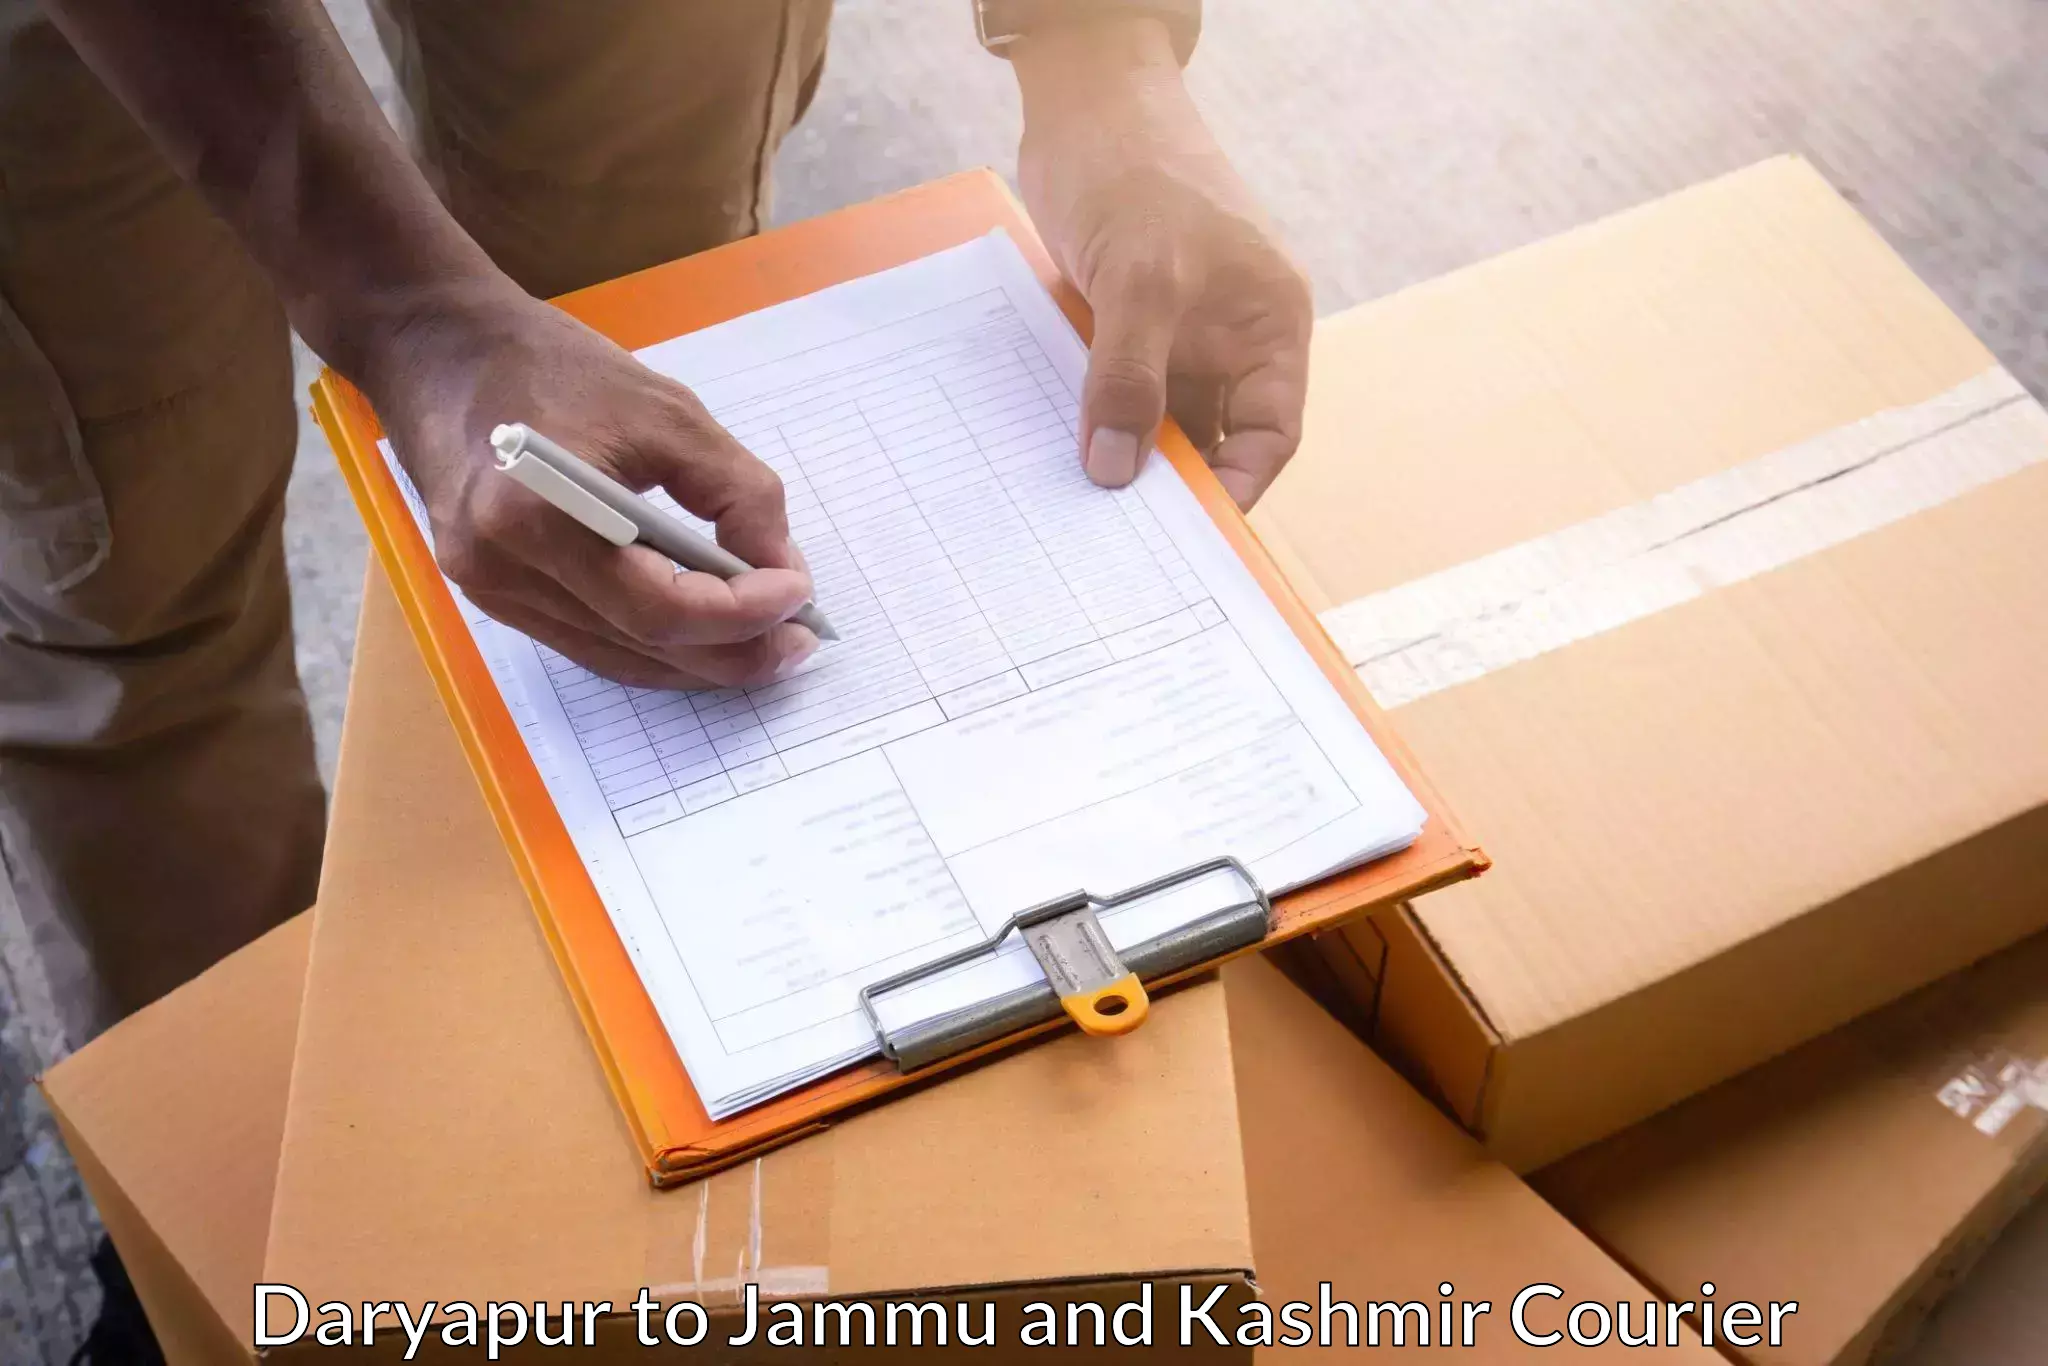 Global shipping solutions in Daryapur to Jammu and Kashmir